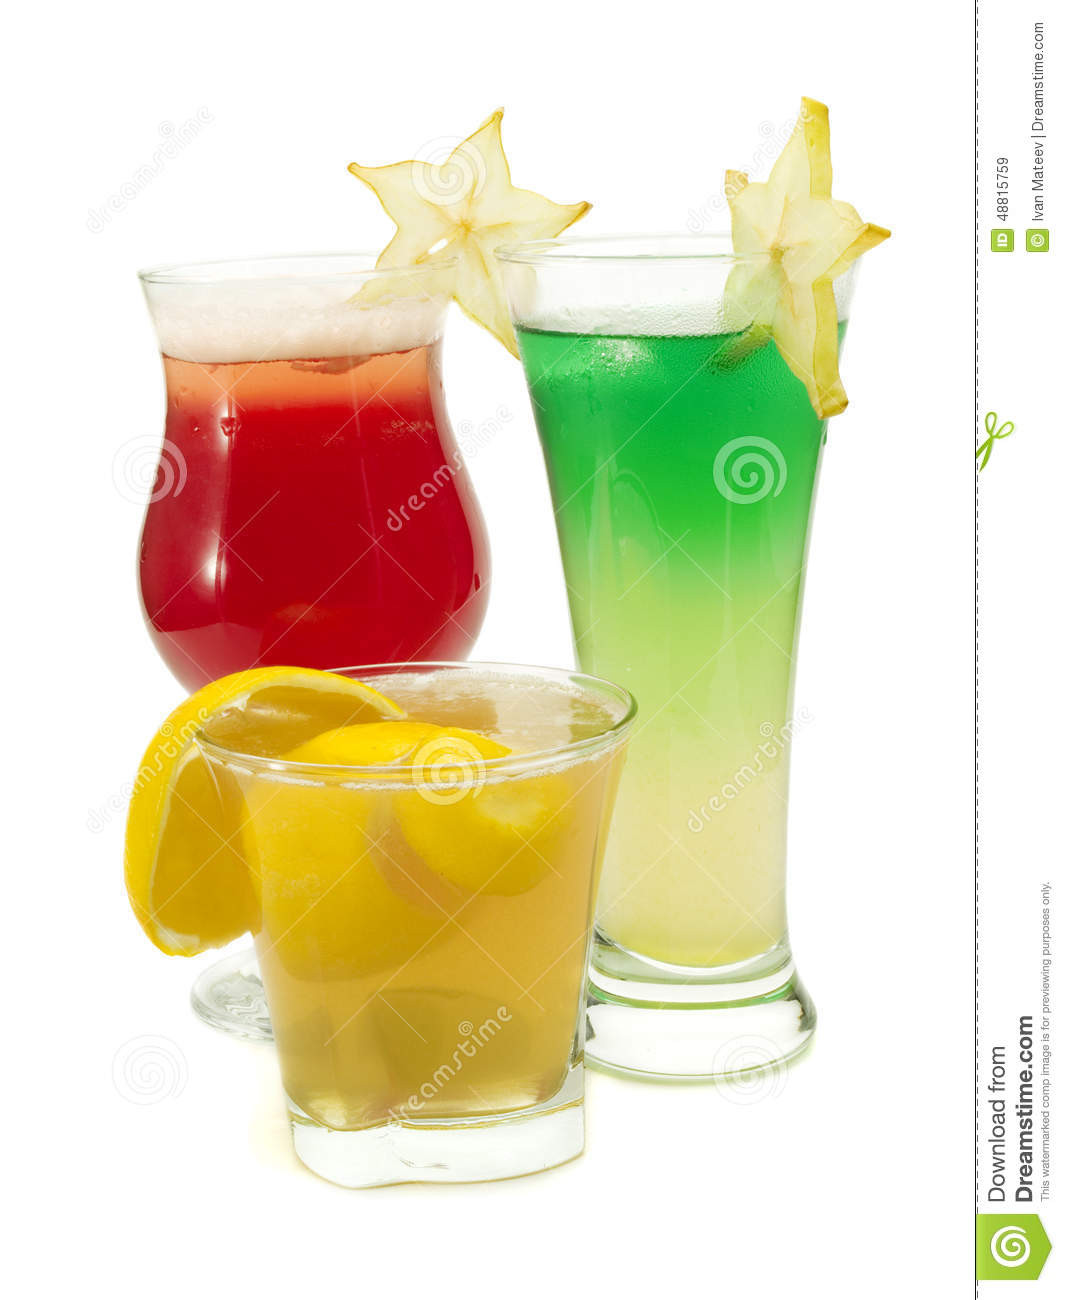 Mixed Drinks With Vodka And Pineapple Juice
 Cocktails Collection Starfruit Cocktail Alien Sky And